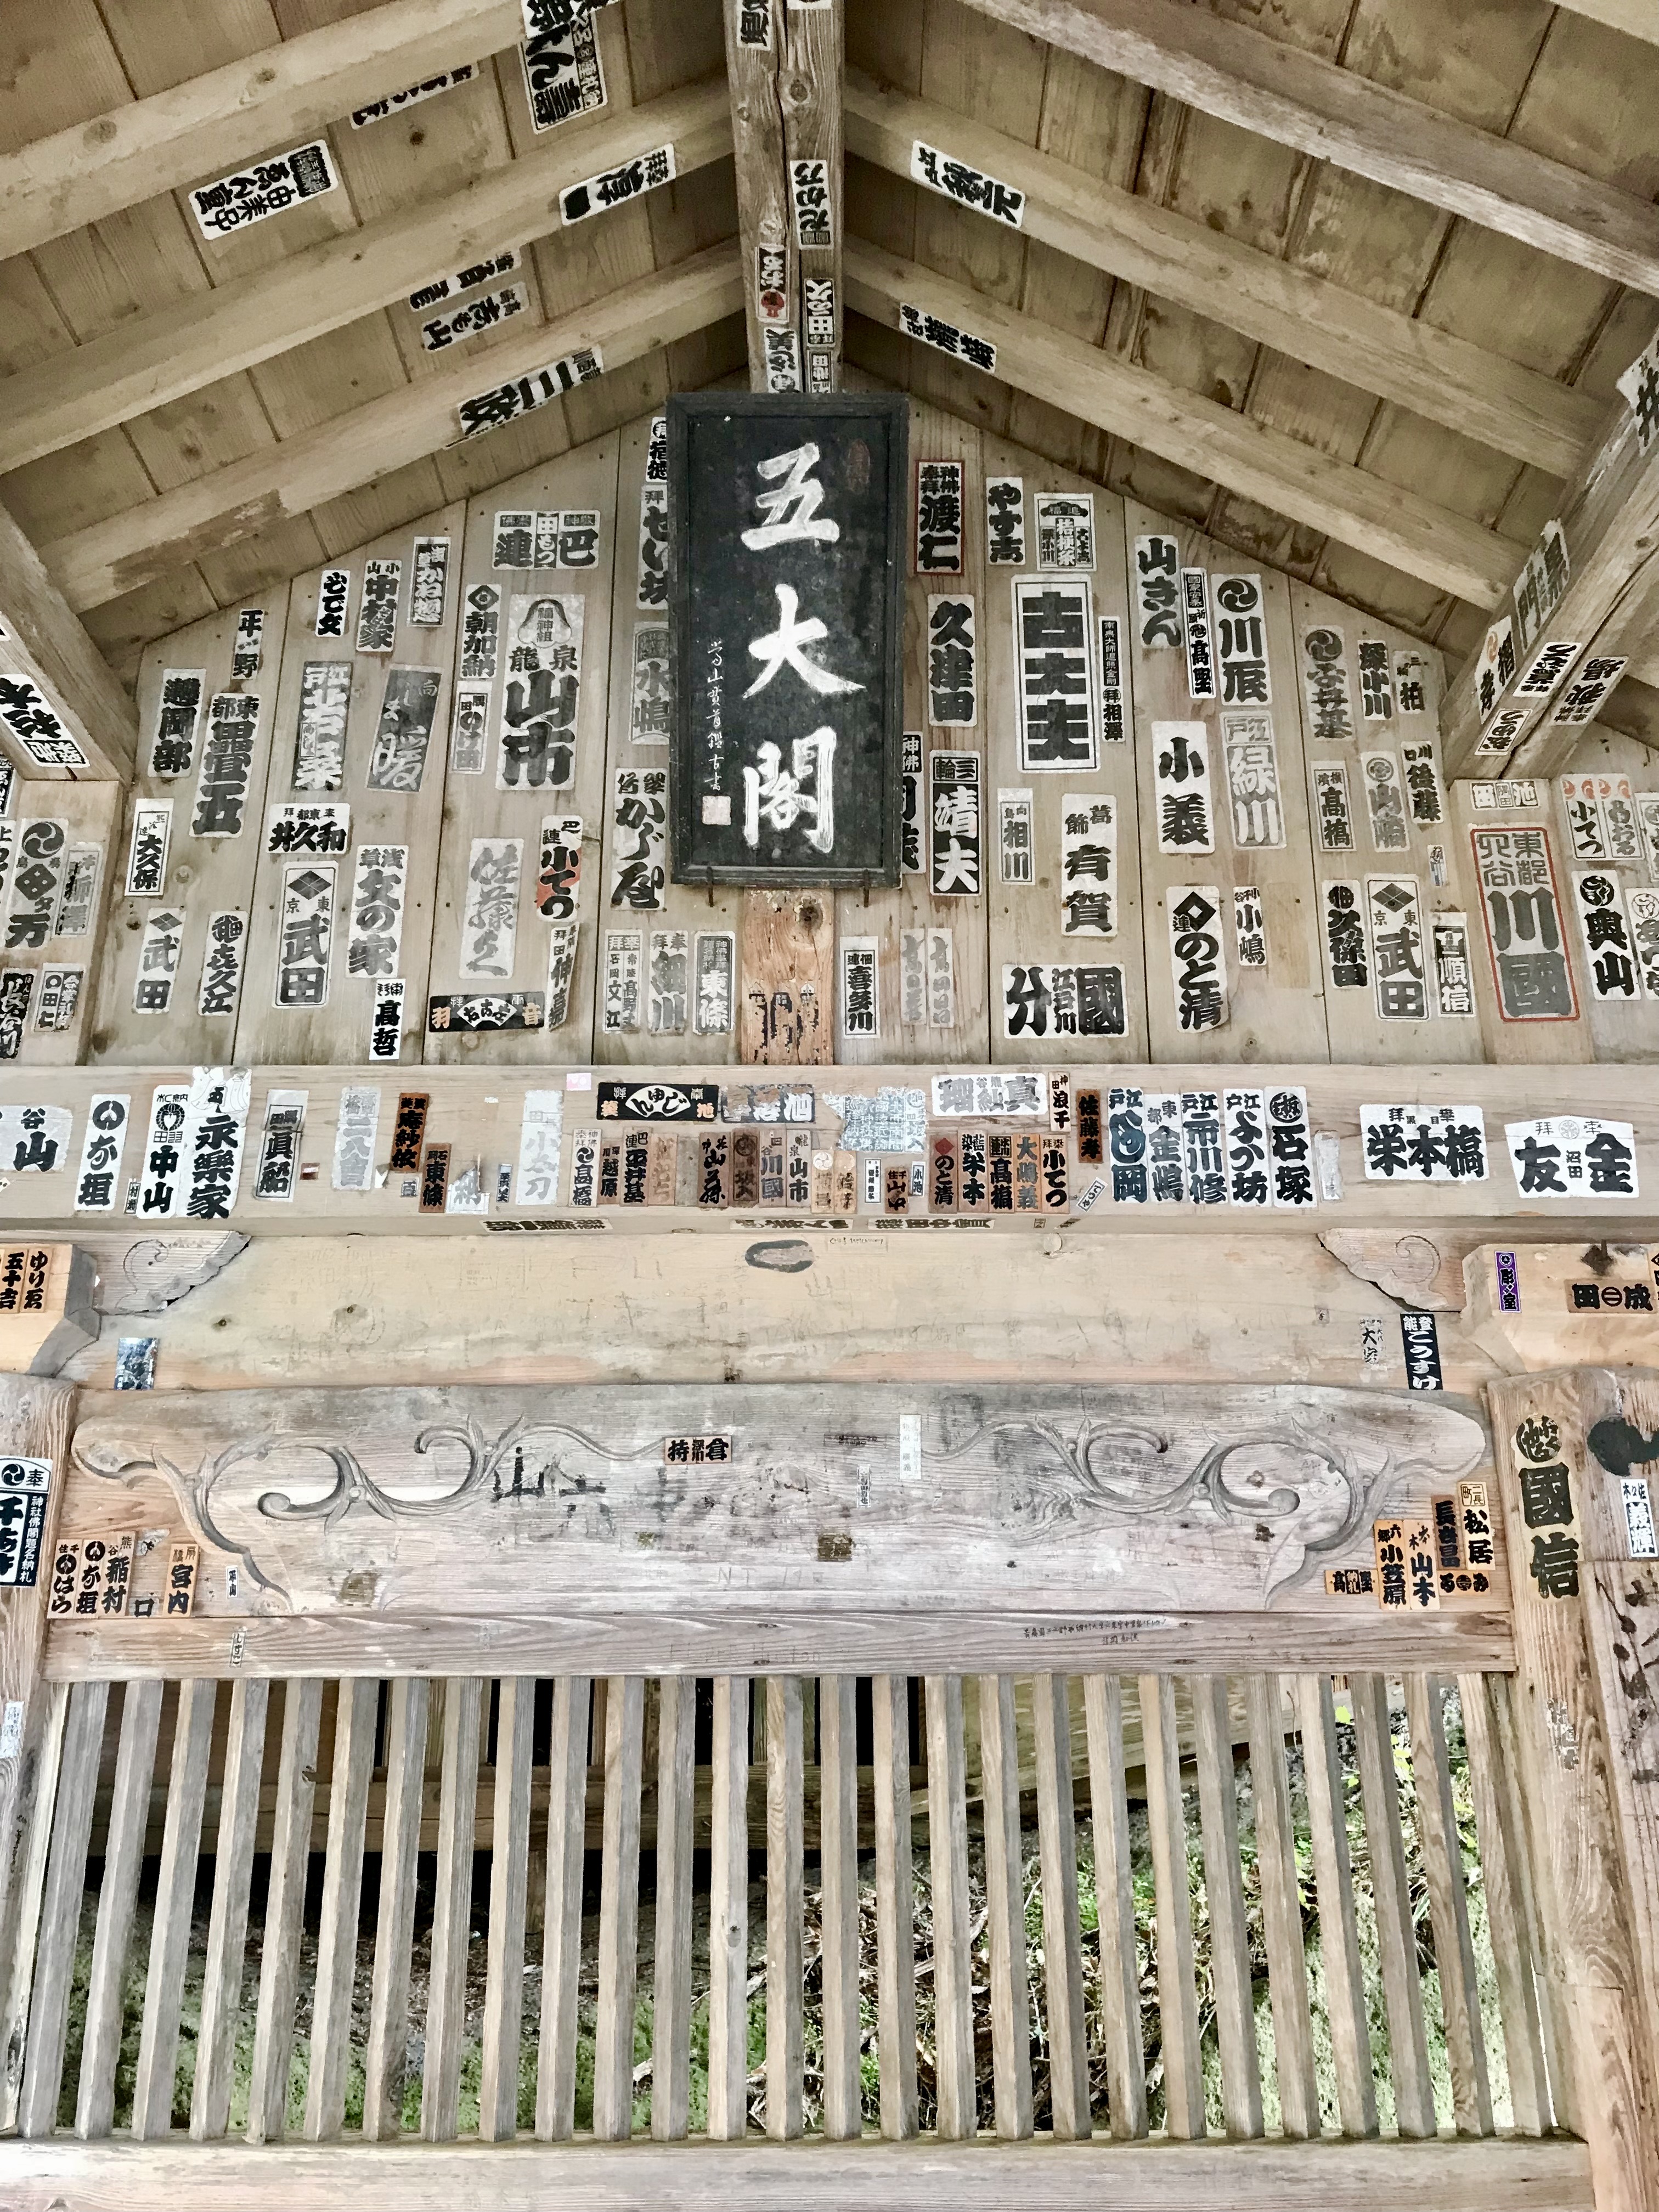 Walls and ceiling of temple on Yamadera covered with senjafuda stickers.